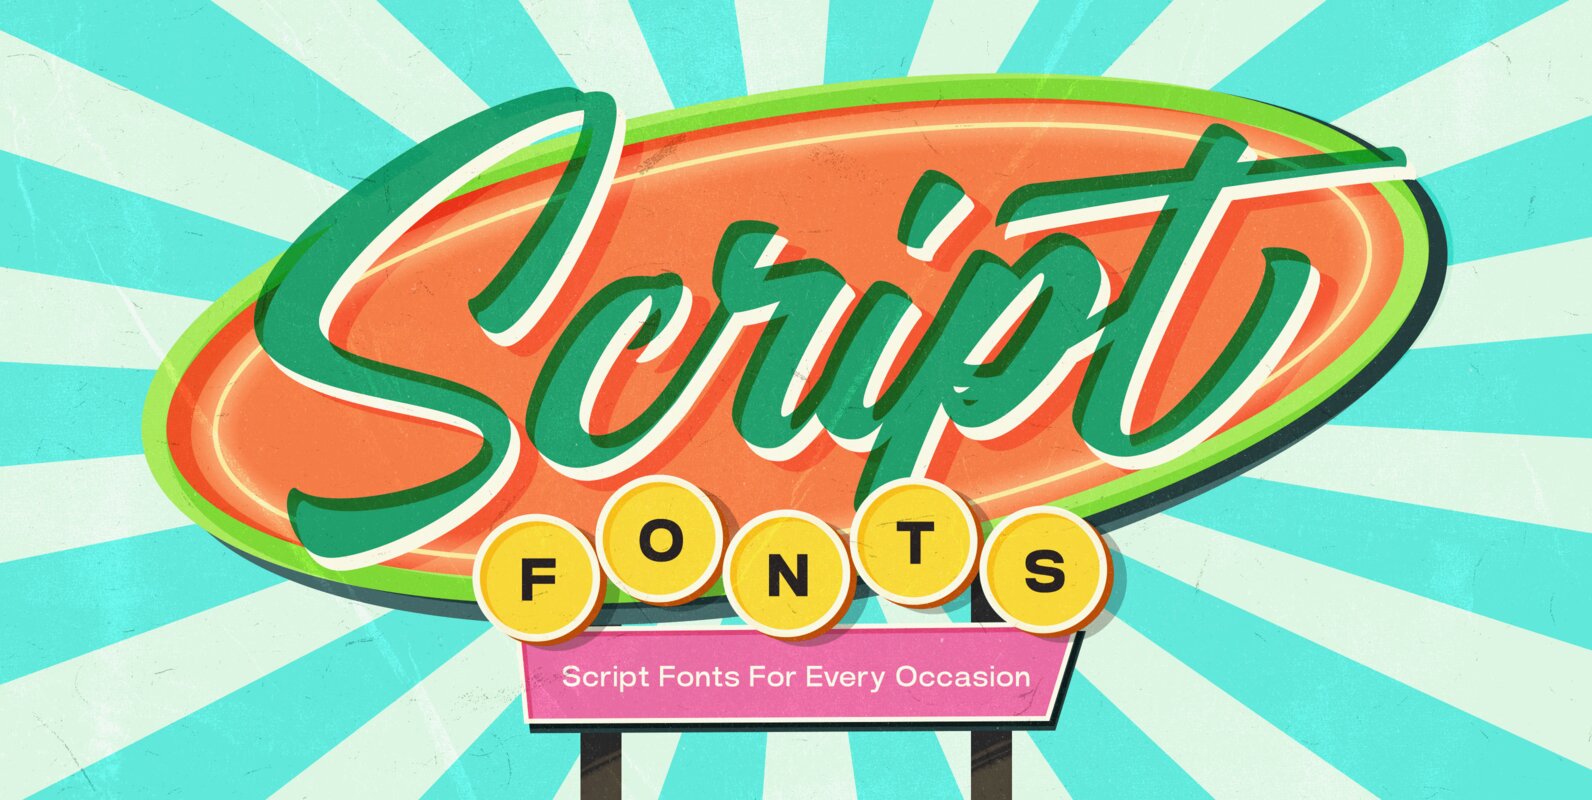 Explore Script Fonts for Every Occasion